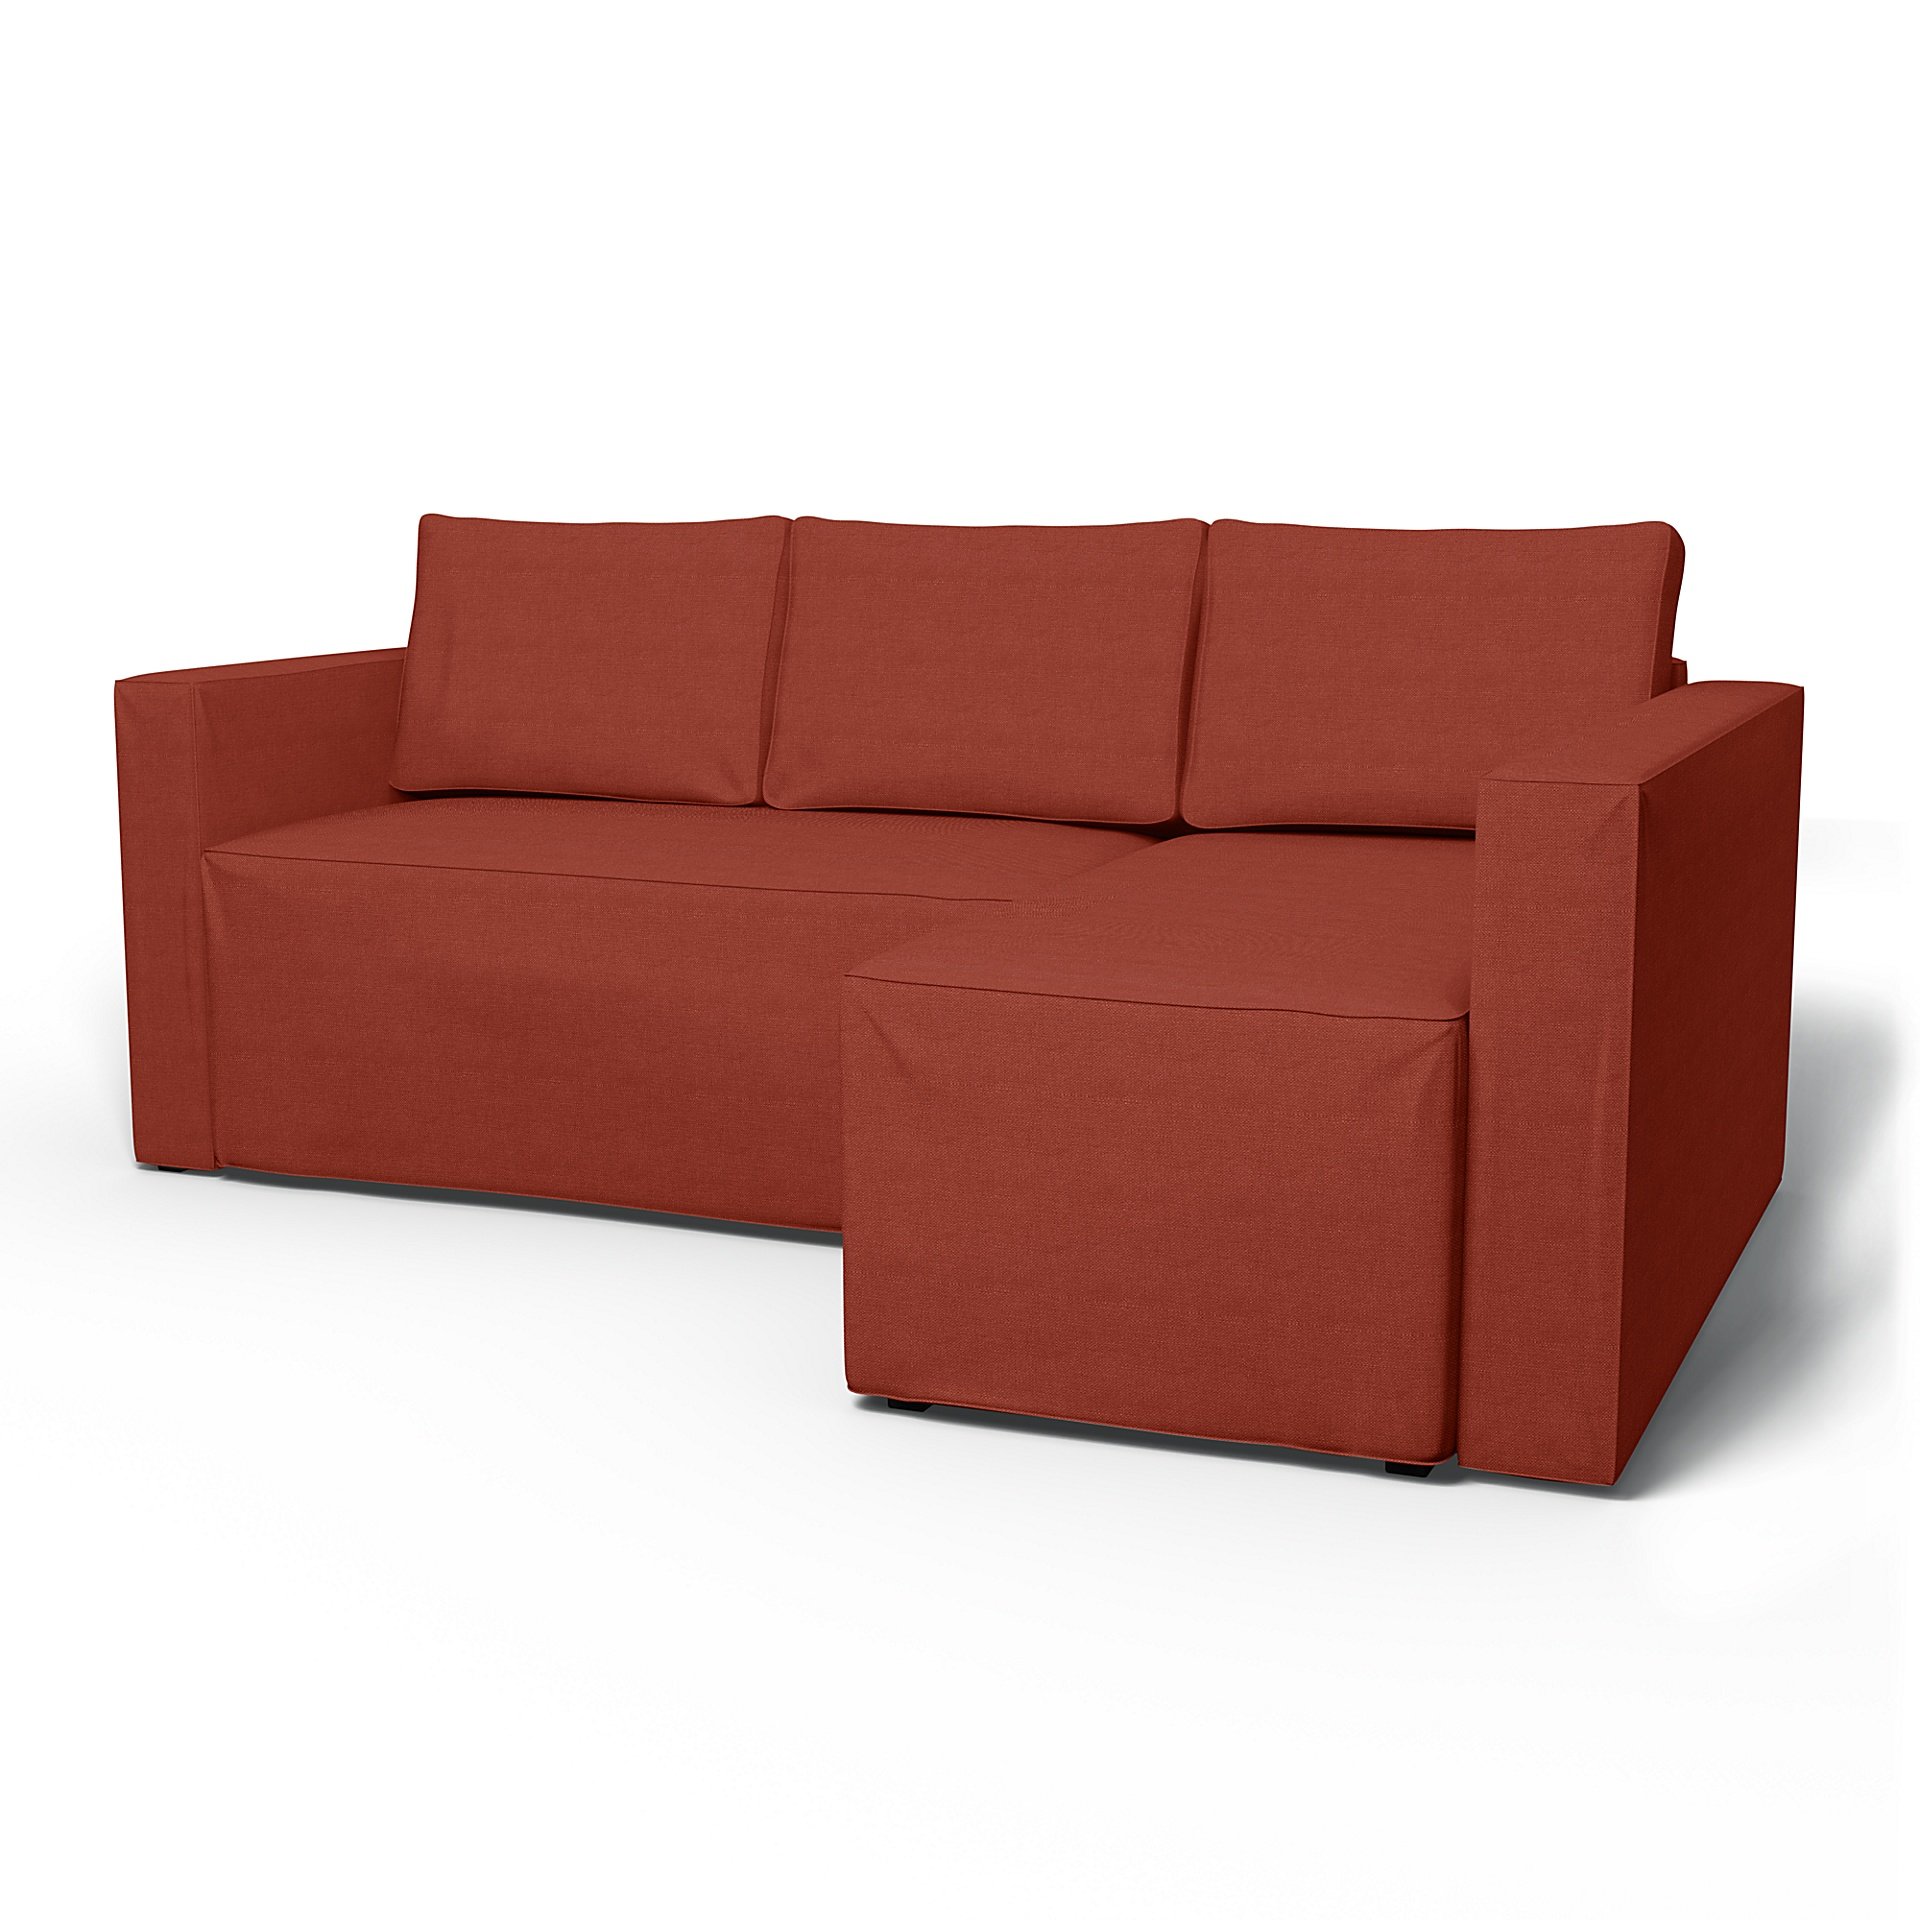 IKEA - Manstad Sofa Bed with Right Chaise Cover, Cayenne, Linen - Bemz